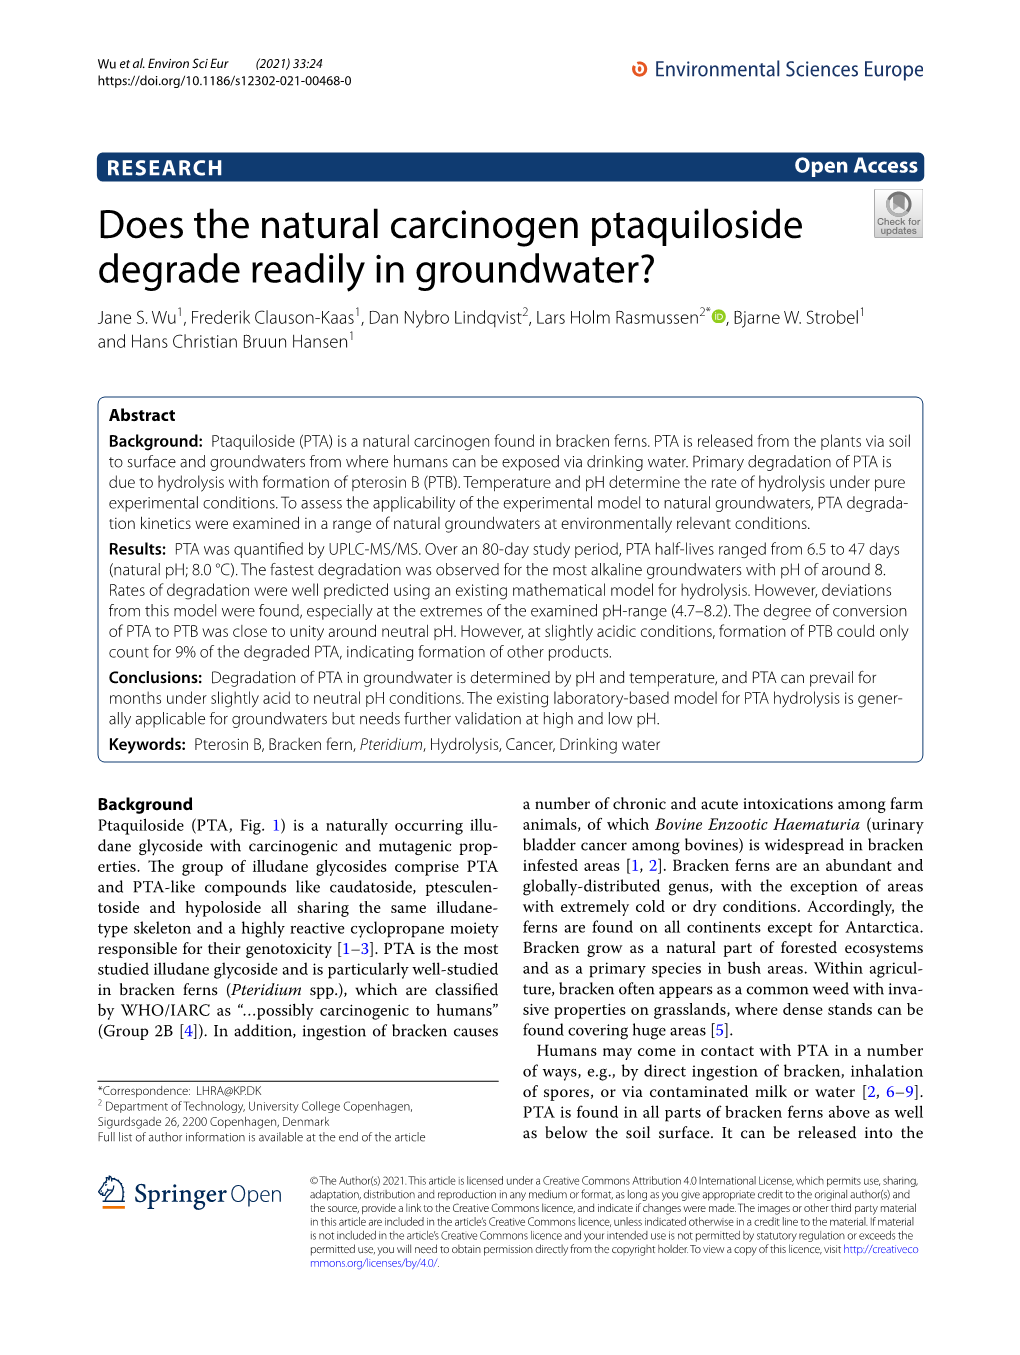 Does the Natural Carcinogen Ptaquiloside Degrade Readily in Groundwater? Jane S